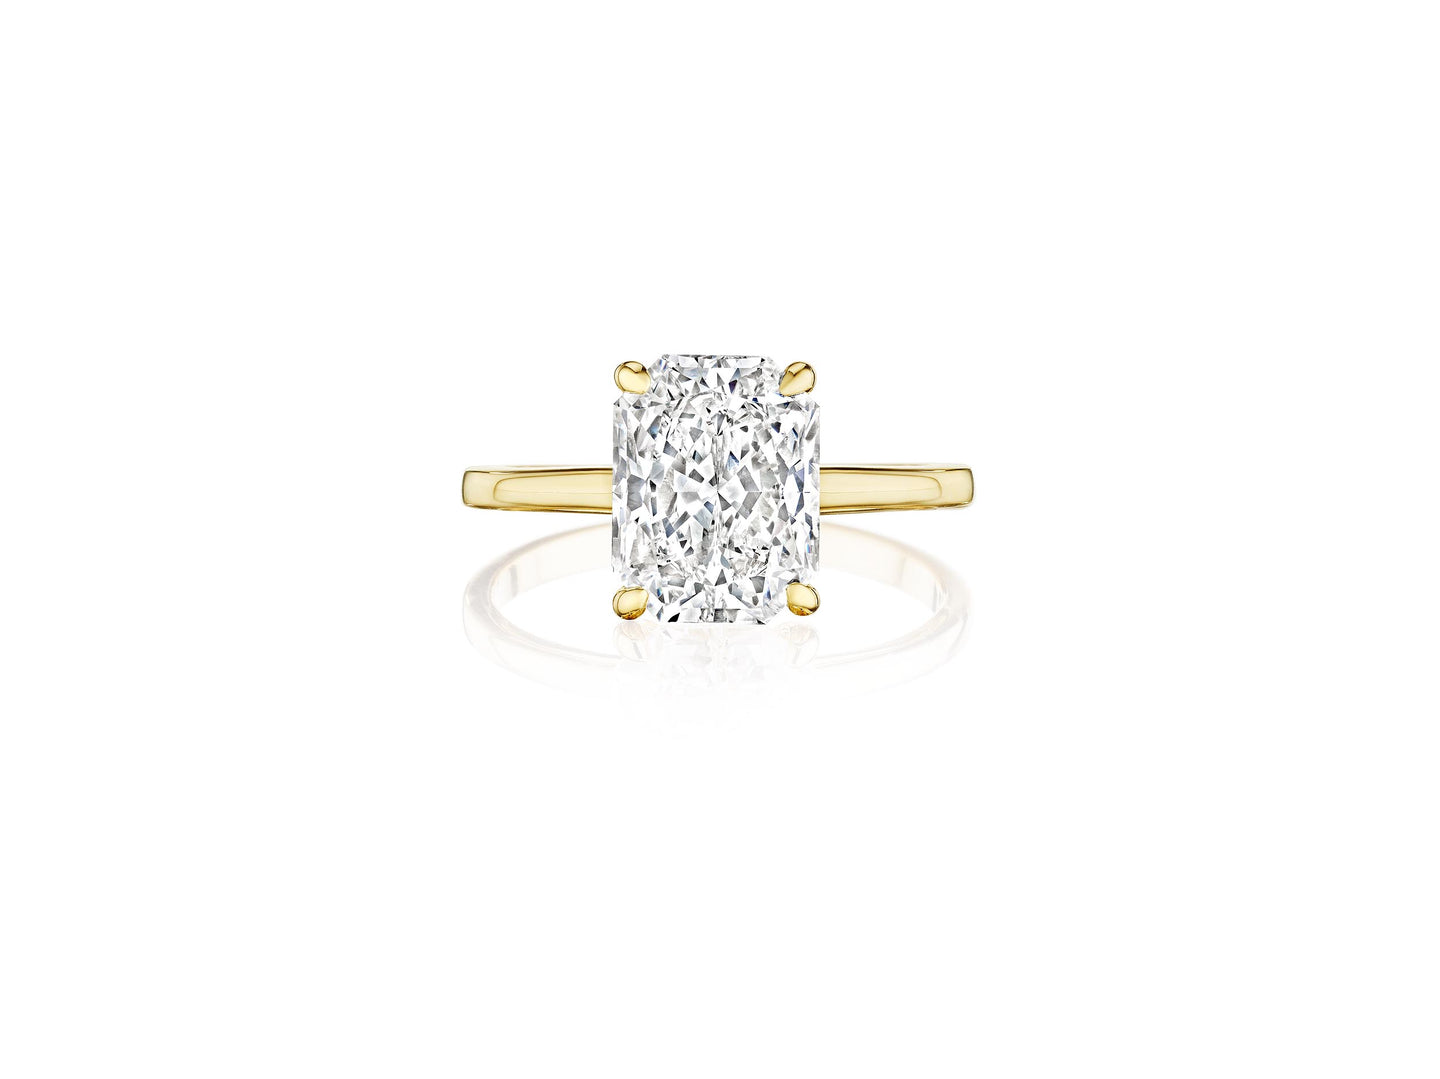 Fink's Exclusive Solitaire Radiant Diamond 14k Yellow Gold Engagement Ring